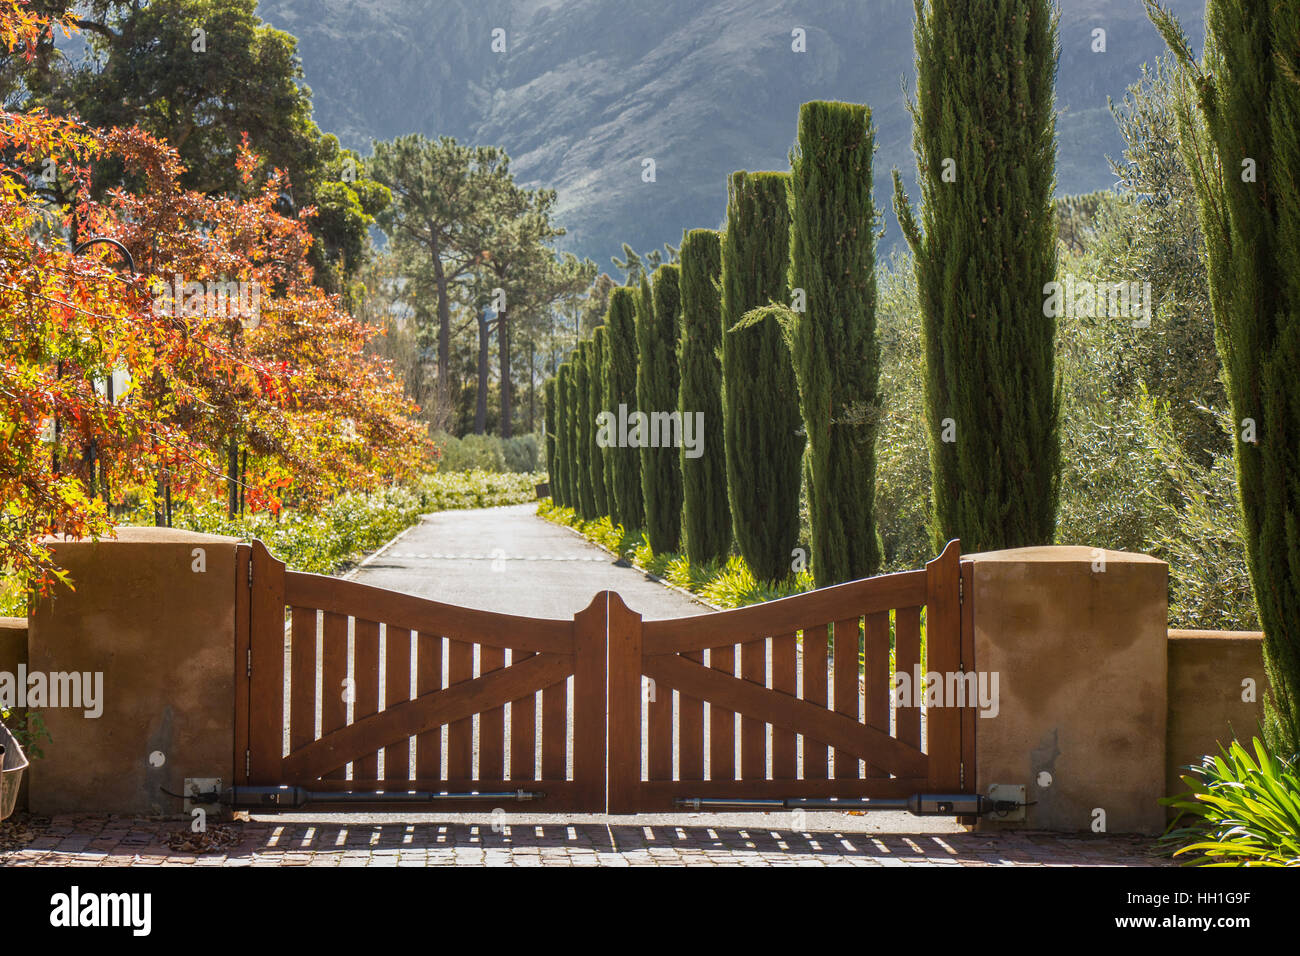 This picturesque scene was taken in Franschhoek Wine Valley, Cafe BonBon at La Petite Dauphine, South Africa. Stock Photo